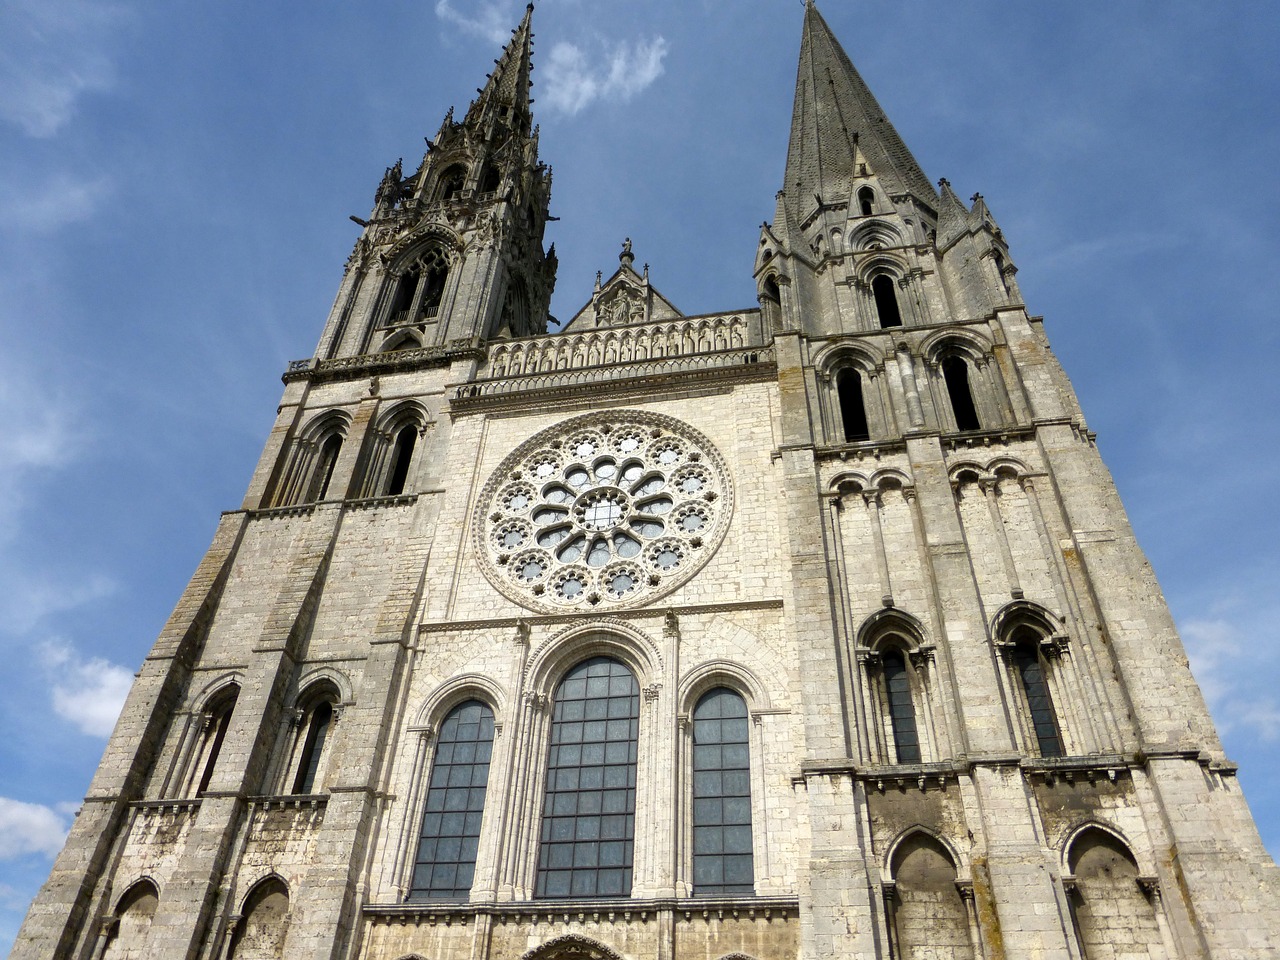 Chartres Cathedral, France. This is one of the most beautiful UNESCO World Heritage Sites in Europe. Discover more such popular heritages sites in Europe inside the article. #UNESCO #unescosites #unescositeseurope #europeunesco #france 